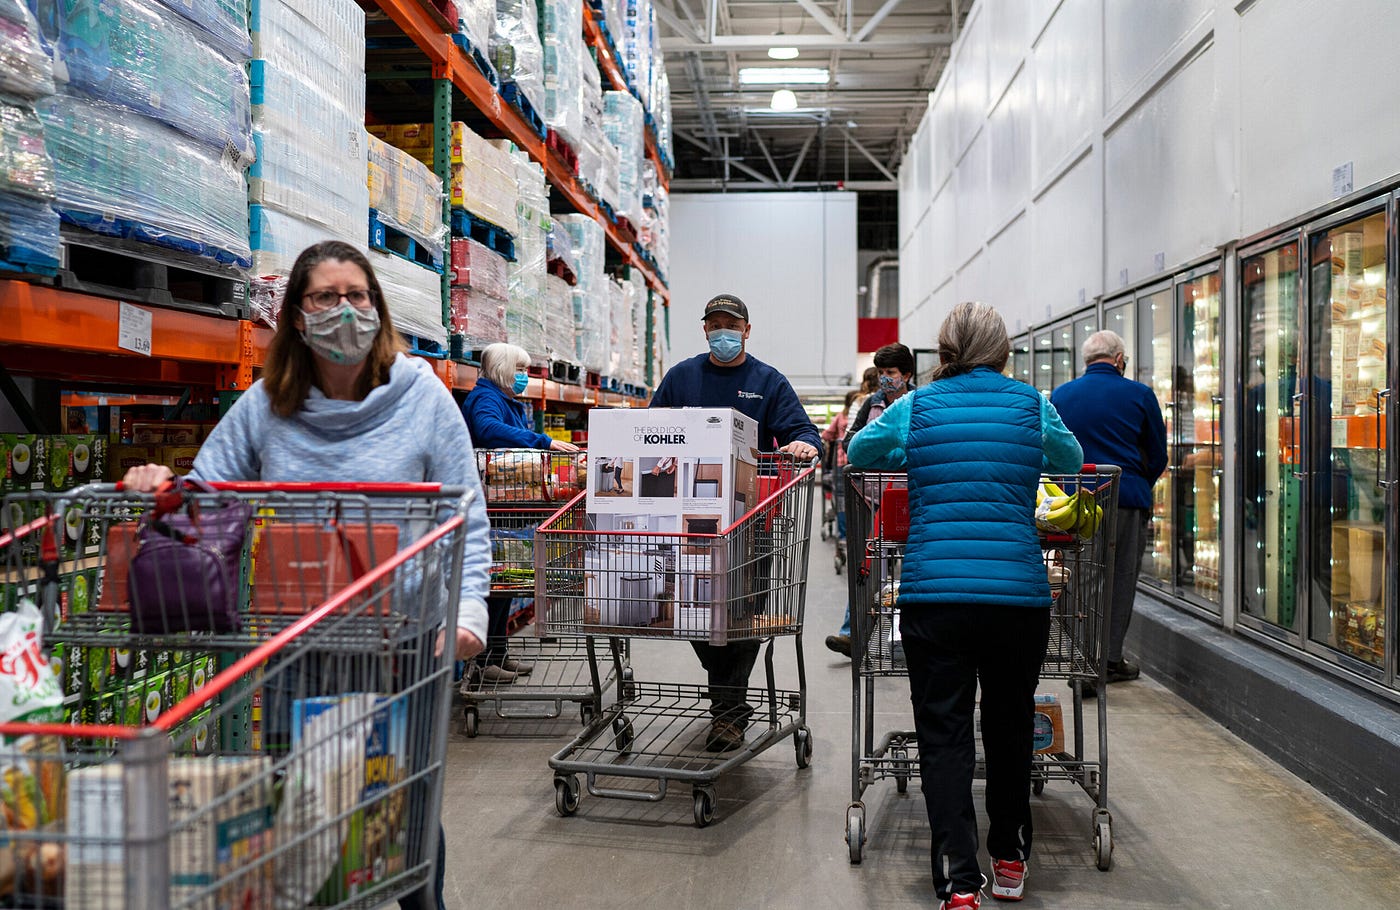 Costco Has a Novel Revenue Stream That its Millions of Members Will Love